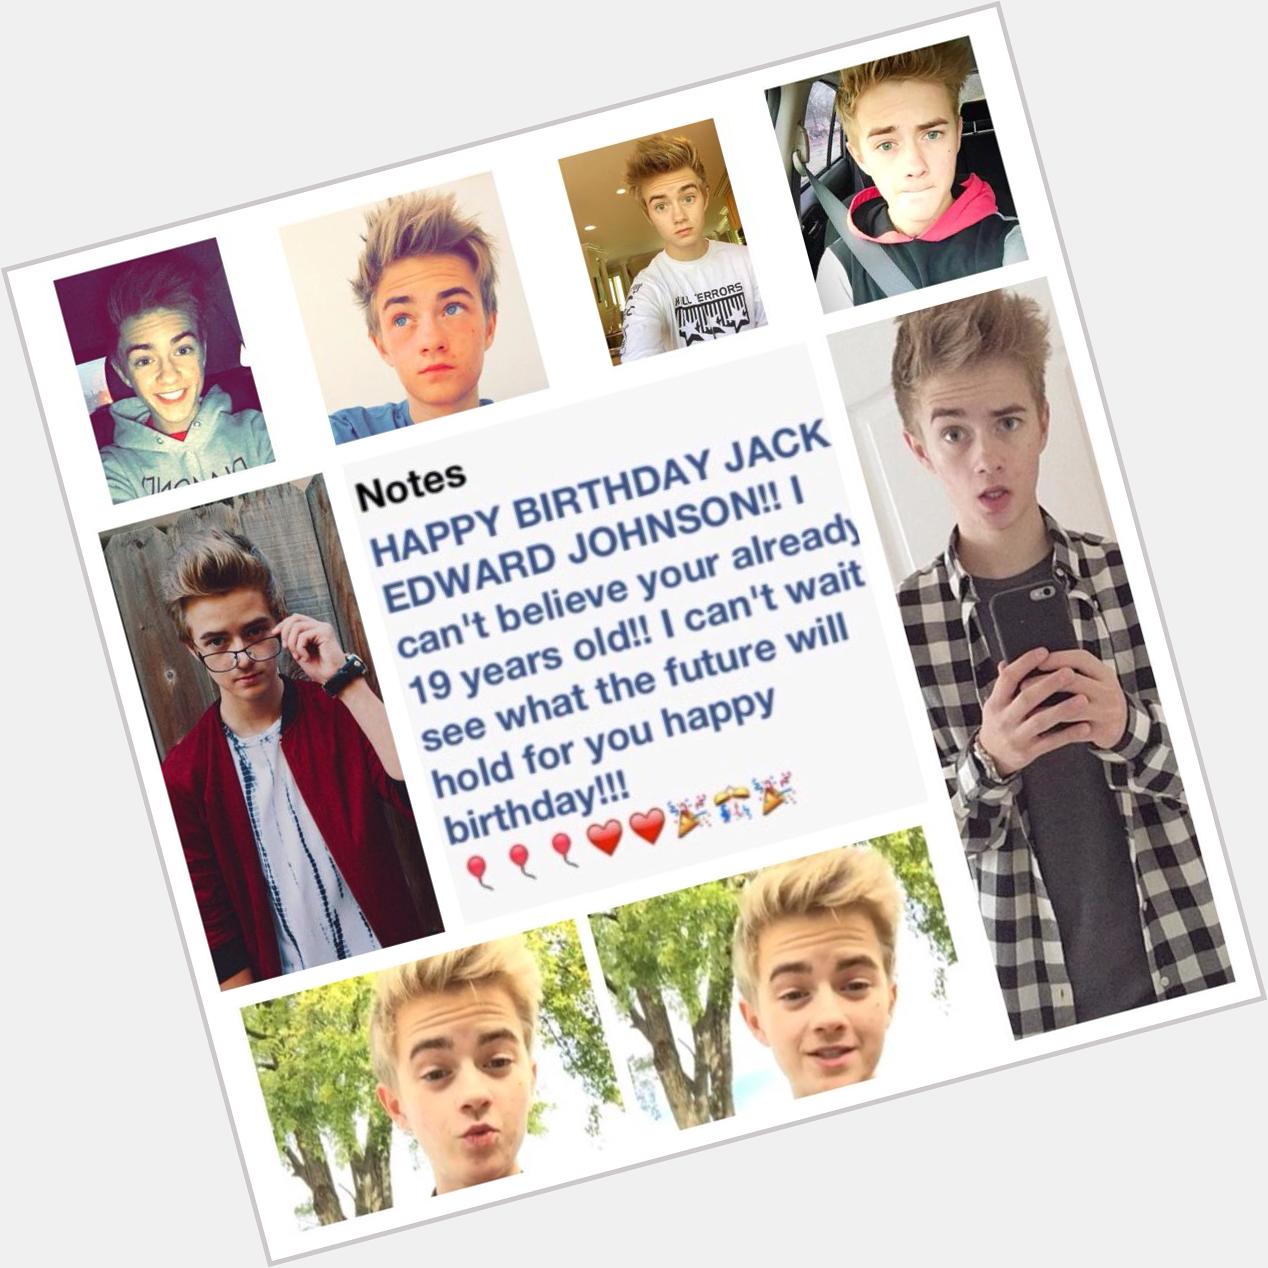 HAPPY BIRTHDAY JACK EDWARD JOHNSON!!! I CAN\T BELIVE YOUR TURNING 19!!!! You make so happy! LOVE YOU SO MUCH!! 